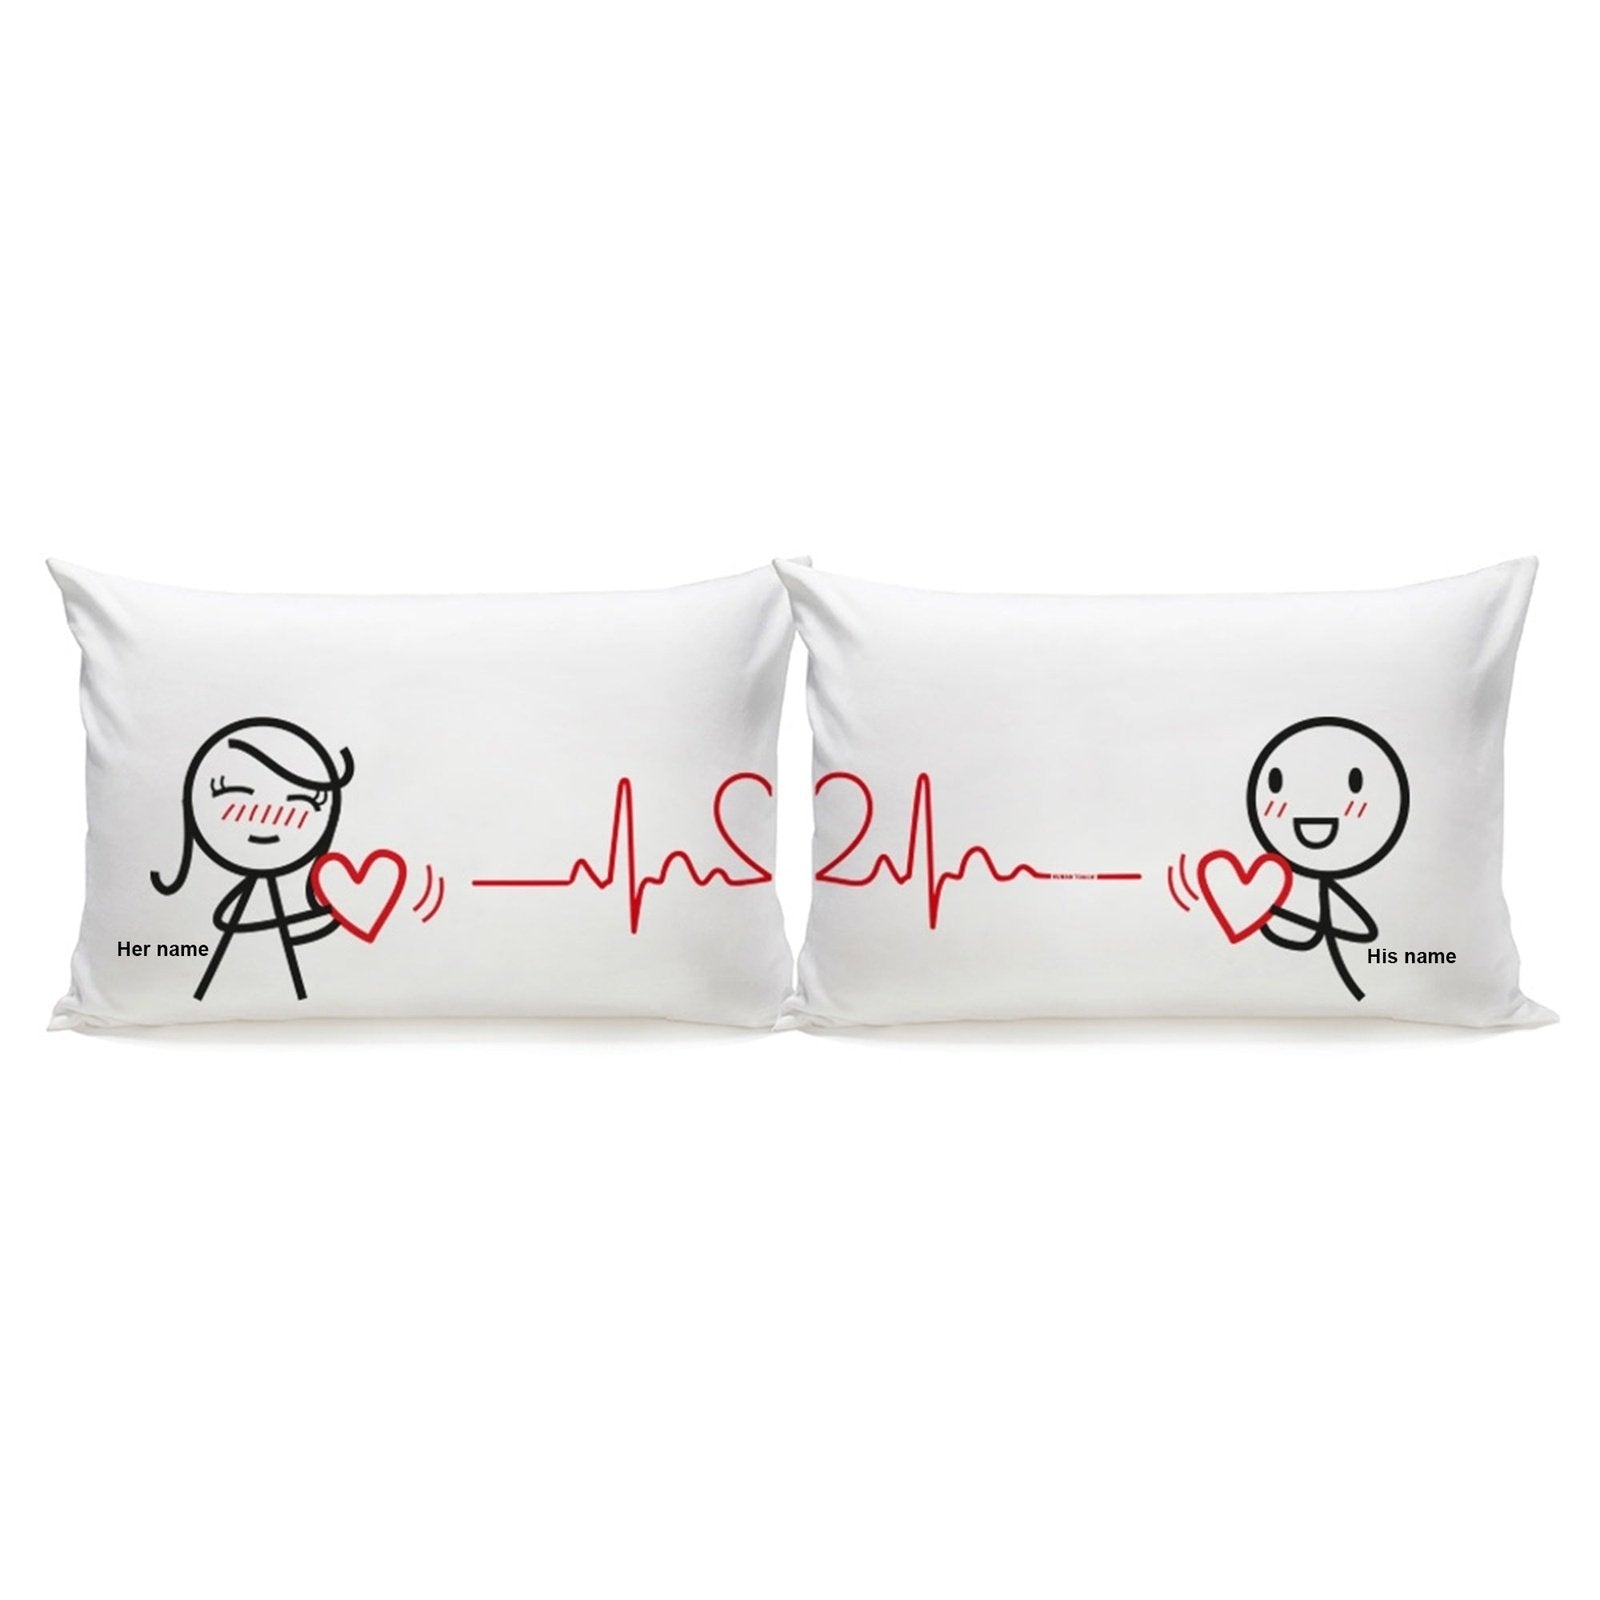 Heart beat for youHome & GardenHuman Touch OfficialThese "Heart beat for you" couple pillowcases will let your special someone know they're your one and only! Perfect for showing your love and affection, these heart-